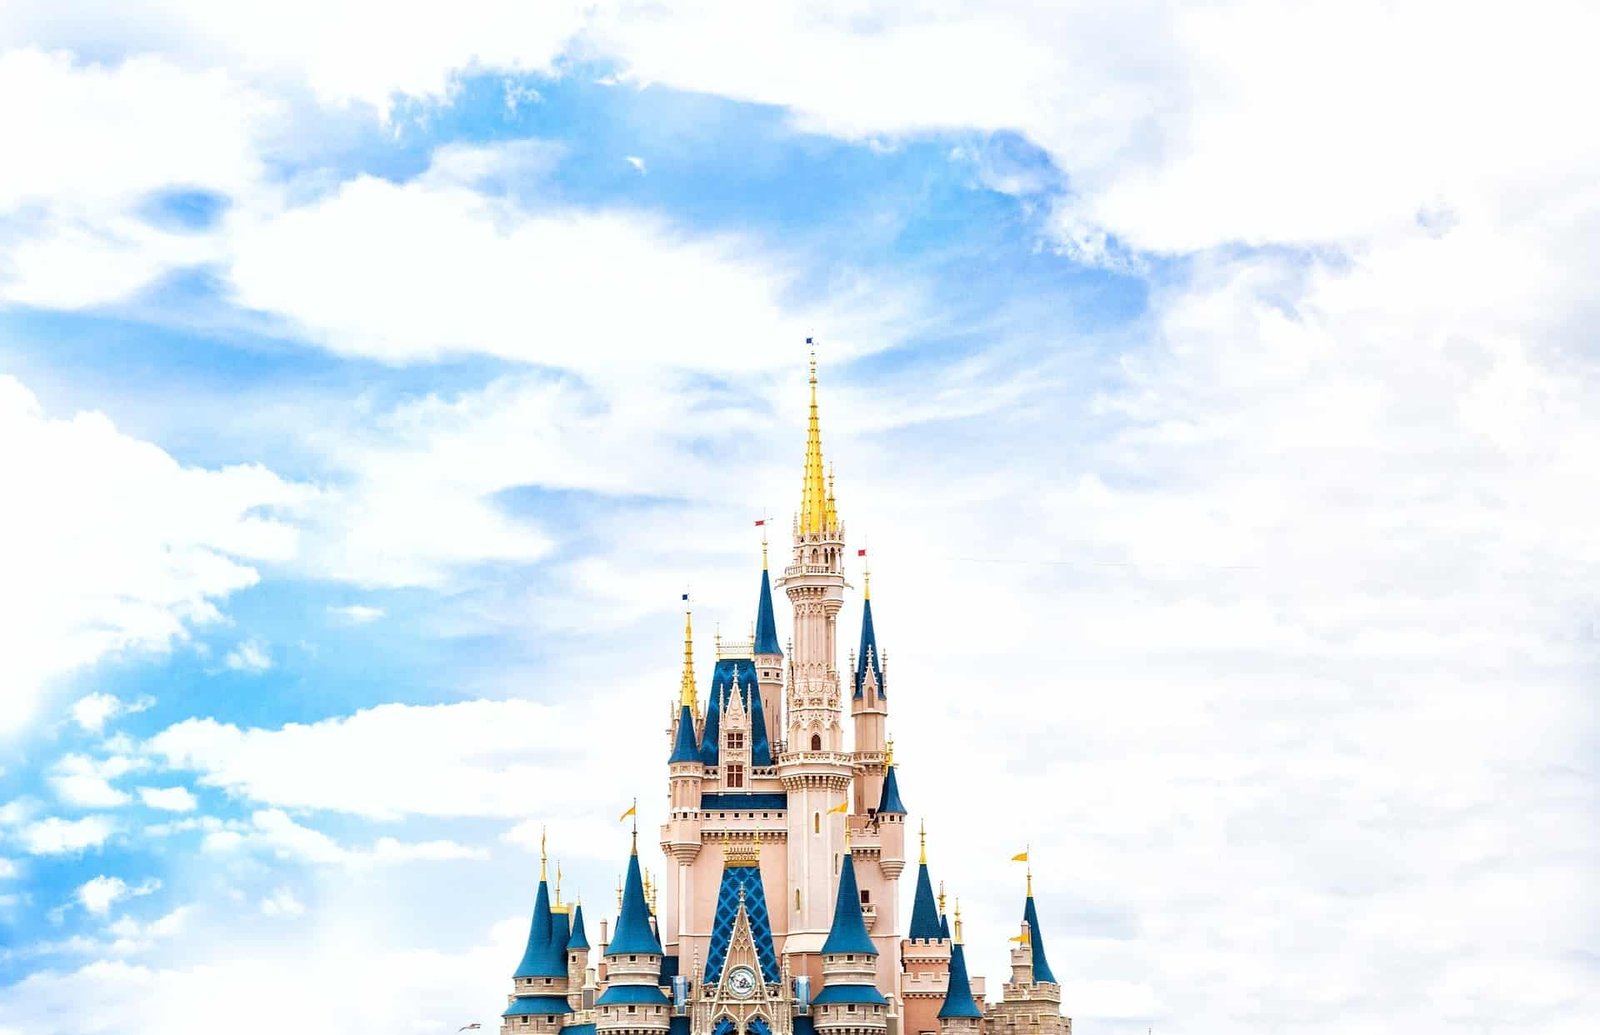 cheap disney packages